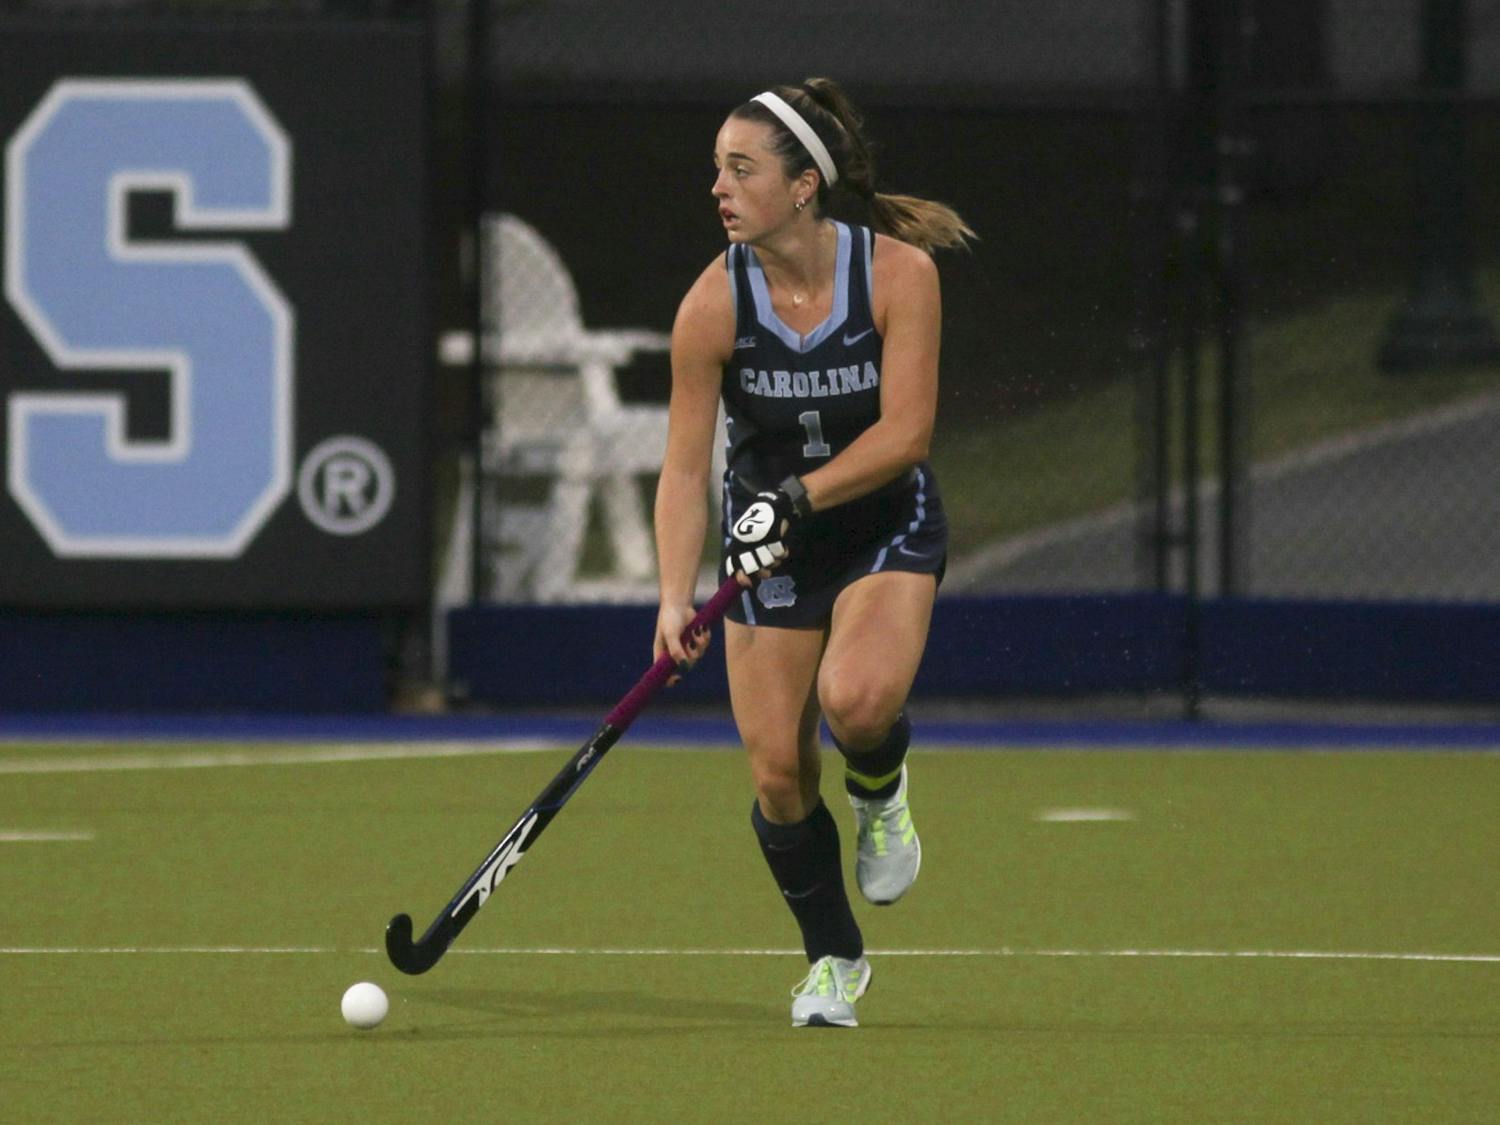 UNC junior forward Erin Matson (1) drives the ball up the field against Syracuse on Oct. 16, 2020 in the Karen Shelton Stadium in Chapel Hill, N.C. Matson scored the only goal of the game, letting UNC beat Syracuse 1-0.